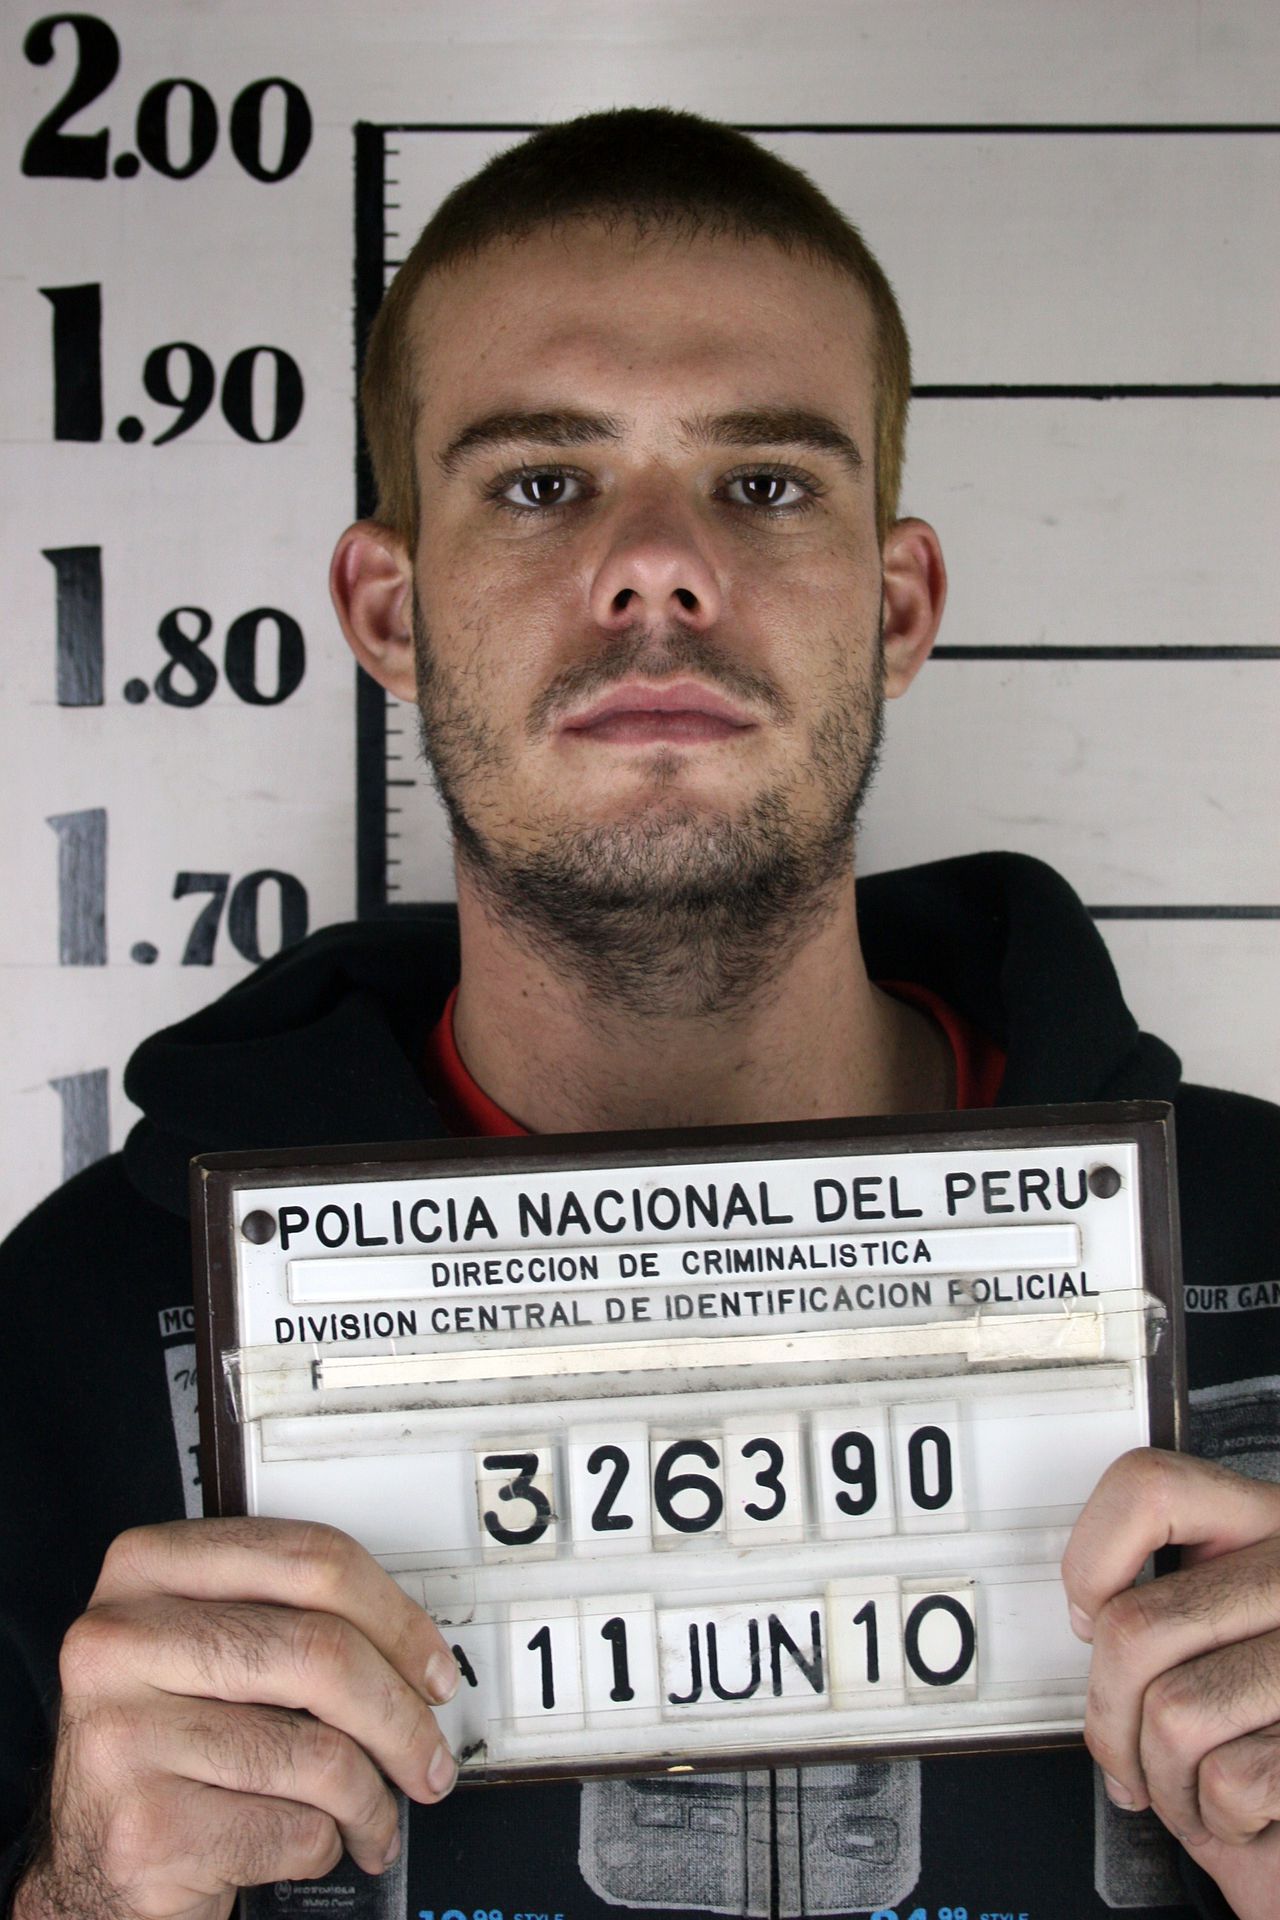 Handout photo released by Peruvian America Television, channel 4, taken on June 11, 2010, of confessed killer Dutch Joran van der Sloot, holding an inmate number at the prosecutor’s office in Lima, moments before he was transferred to the Miguel Castro Castro prison in the outskirts of the city. Van der Sloot, 22, was charged with the murder of Peruvian Stephany Flores, 21. US investigators also are following Van der Sloot for the disappearance of US Natalee Holloway in Aruba in 2005, when he was acquitted for lack of proof. AFP PHOTO / AMERICA TELEVISION